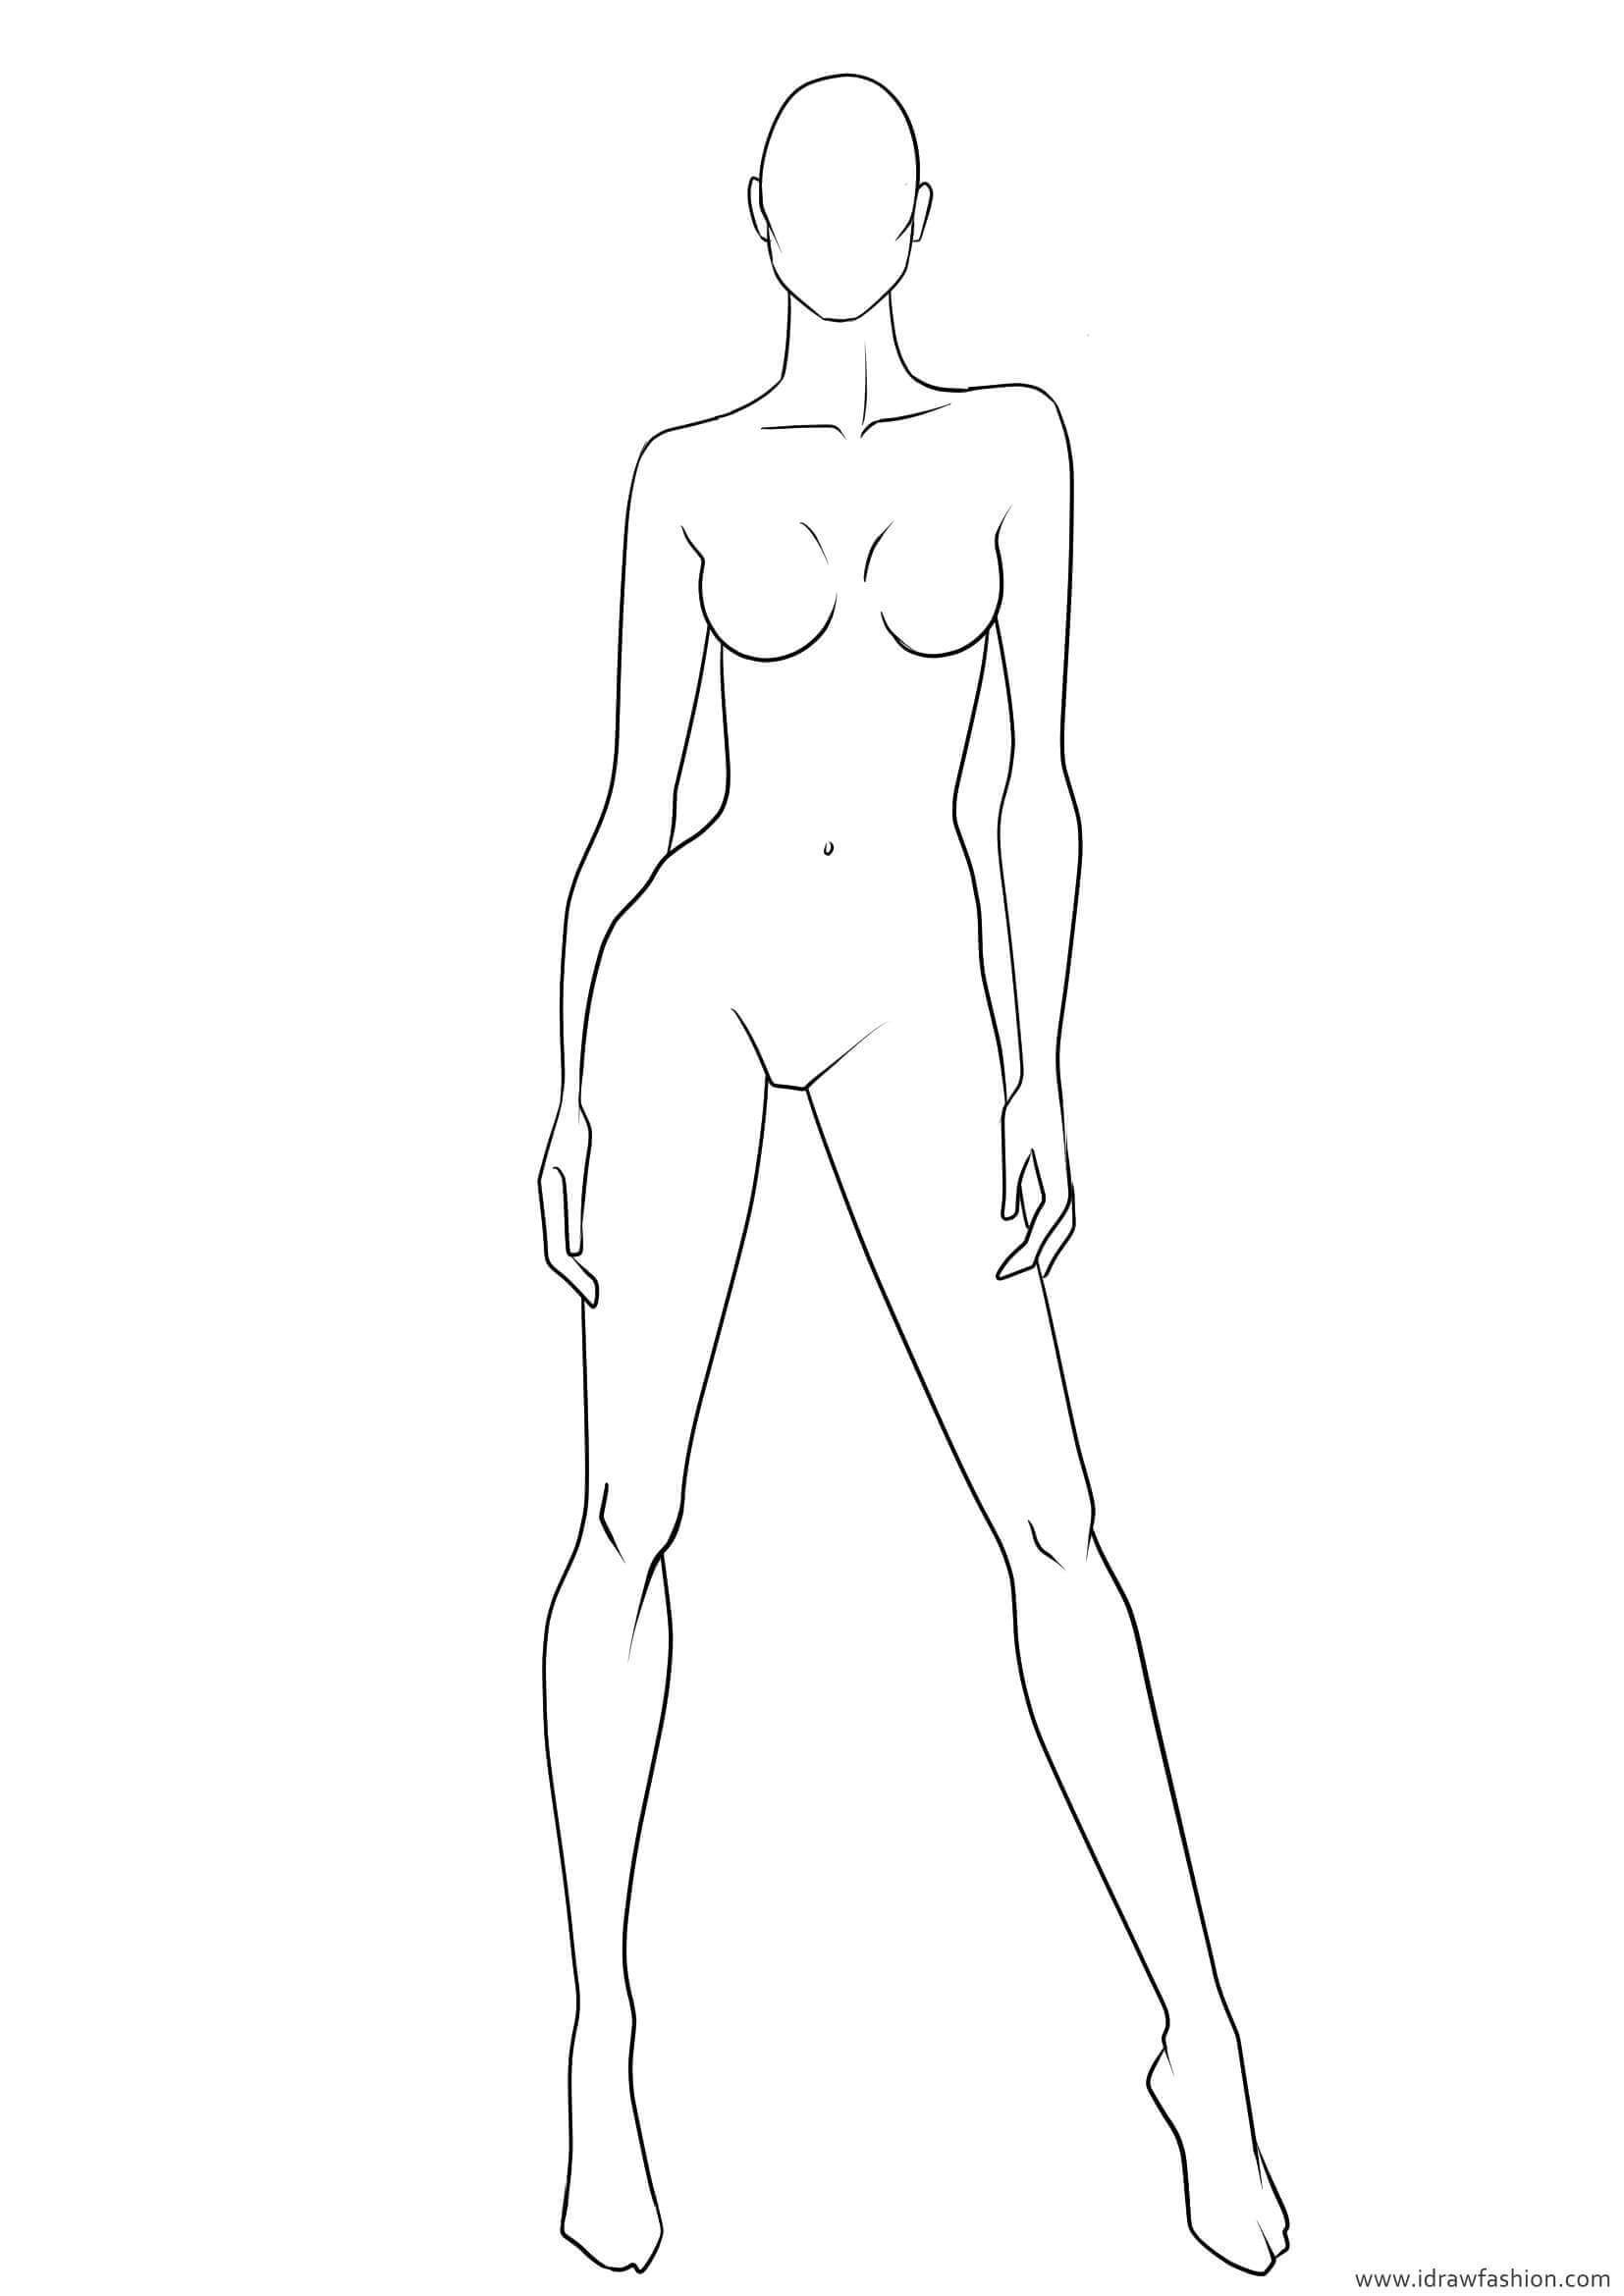 Blank Body Sketch At Paintingvalley | Explore Collection Regarding Blank Model Sketch Template